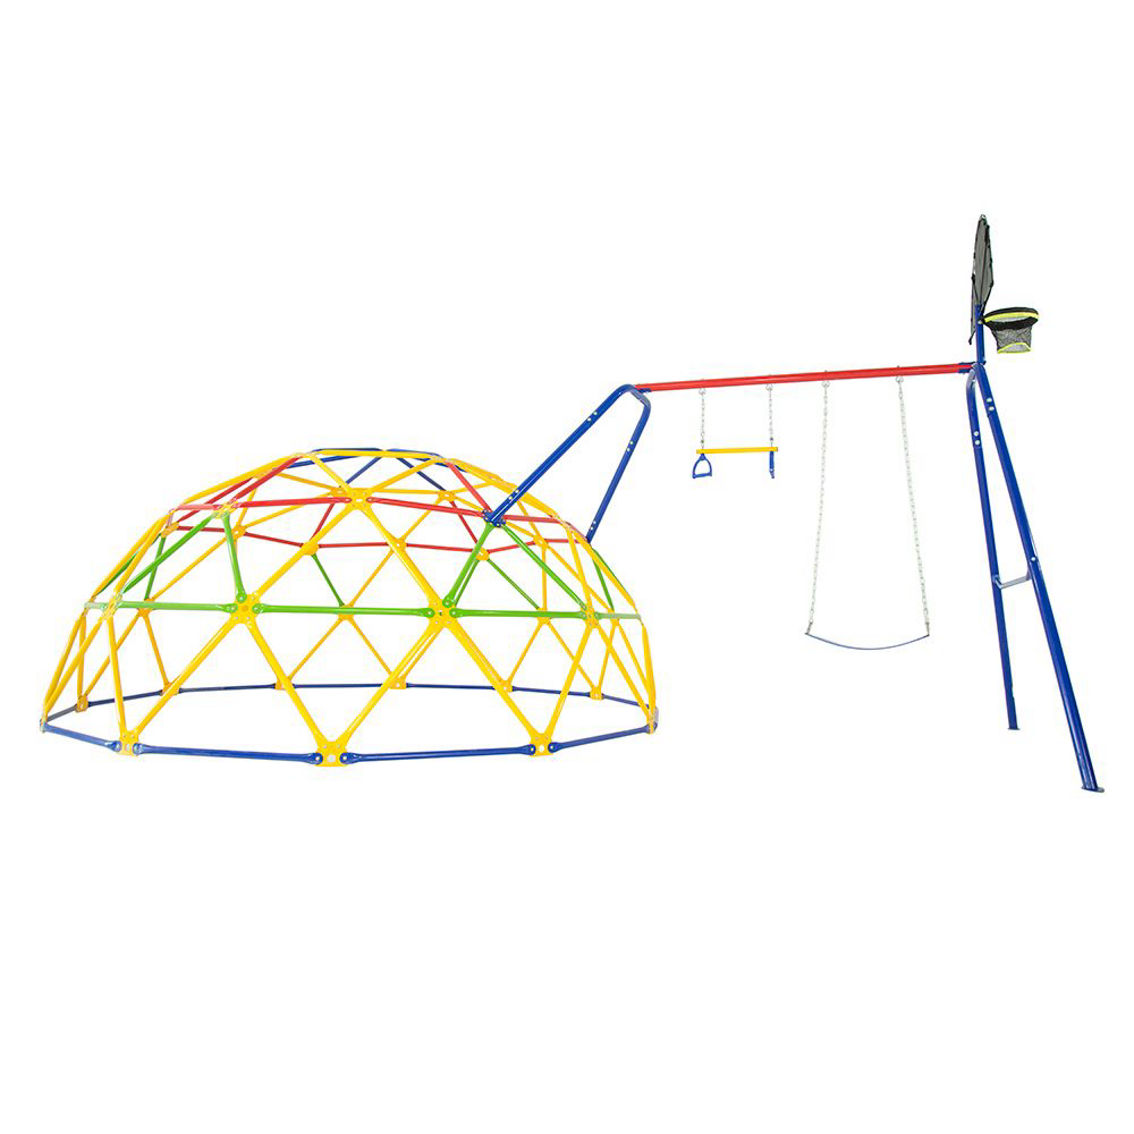 ActivPlay 12' Geo Dome Climber with Swing Set